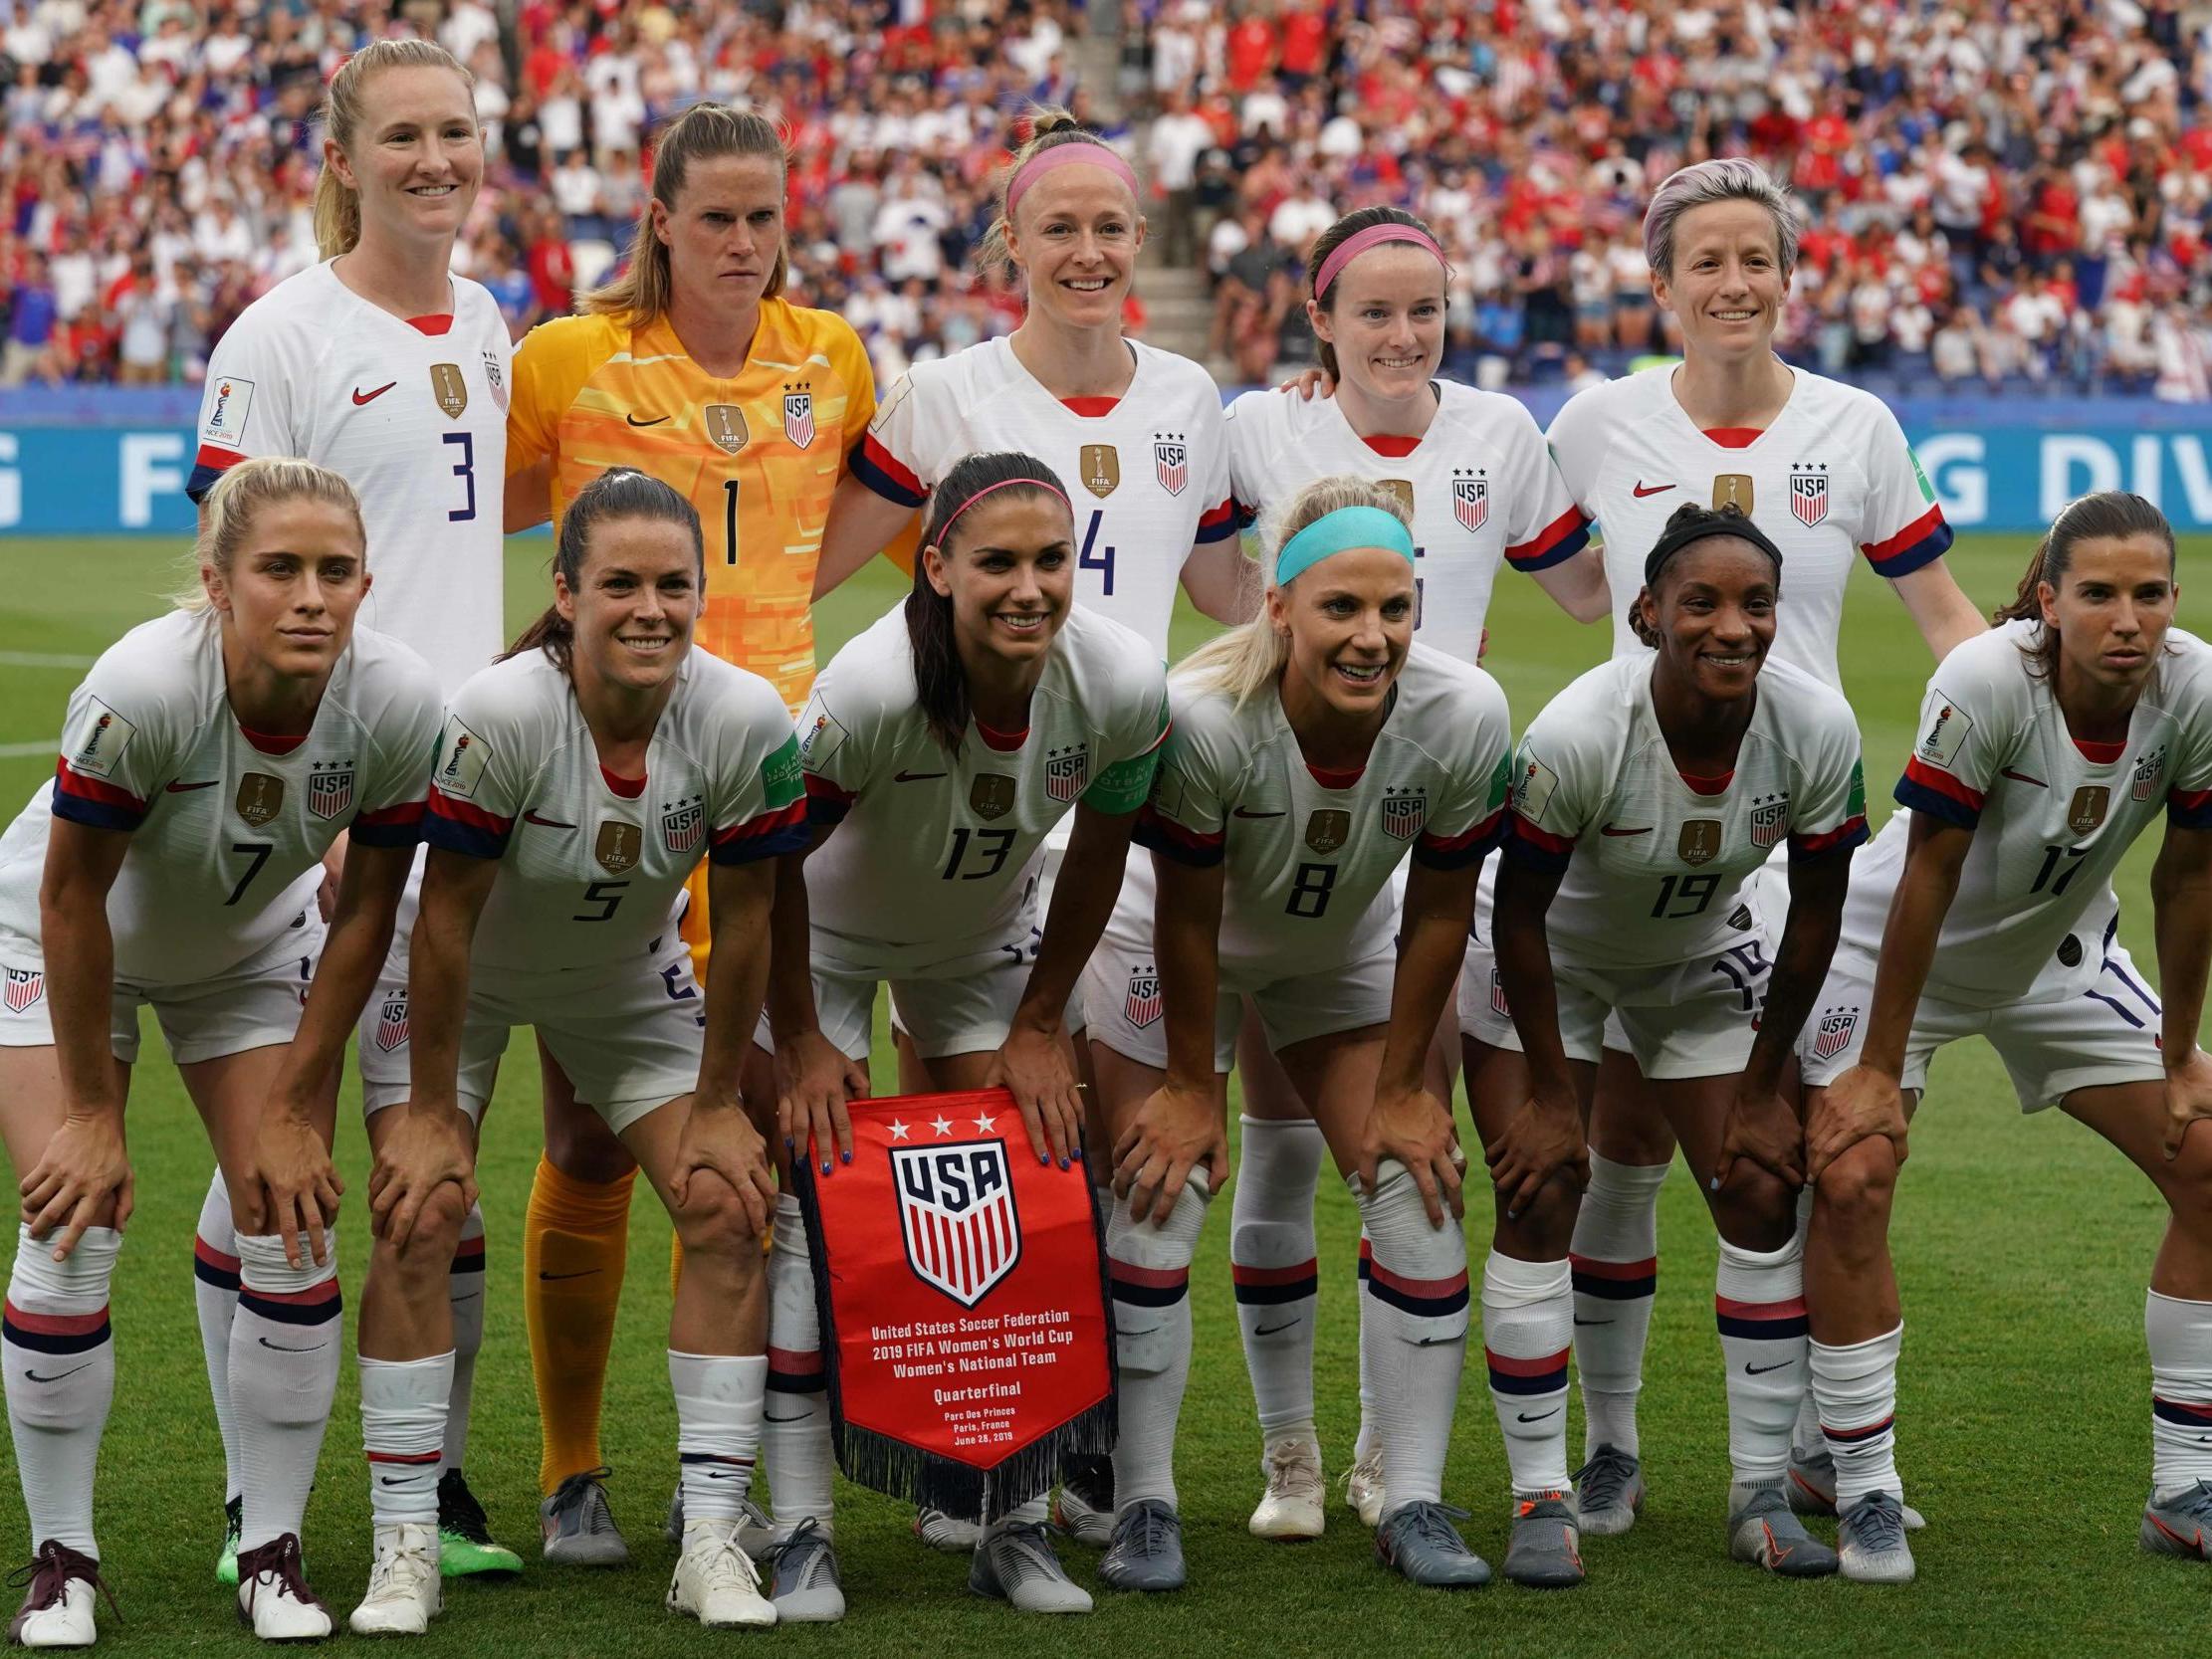 The United States pose for a team photo at the 2019 Women’s World Cup